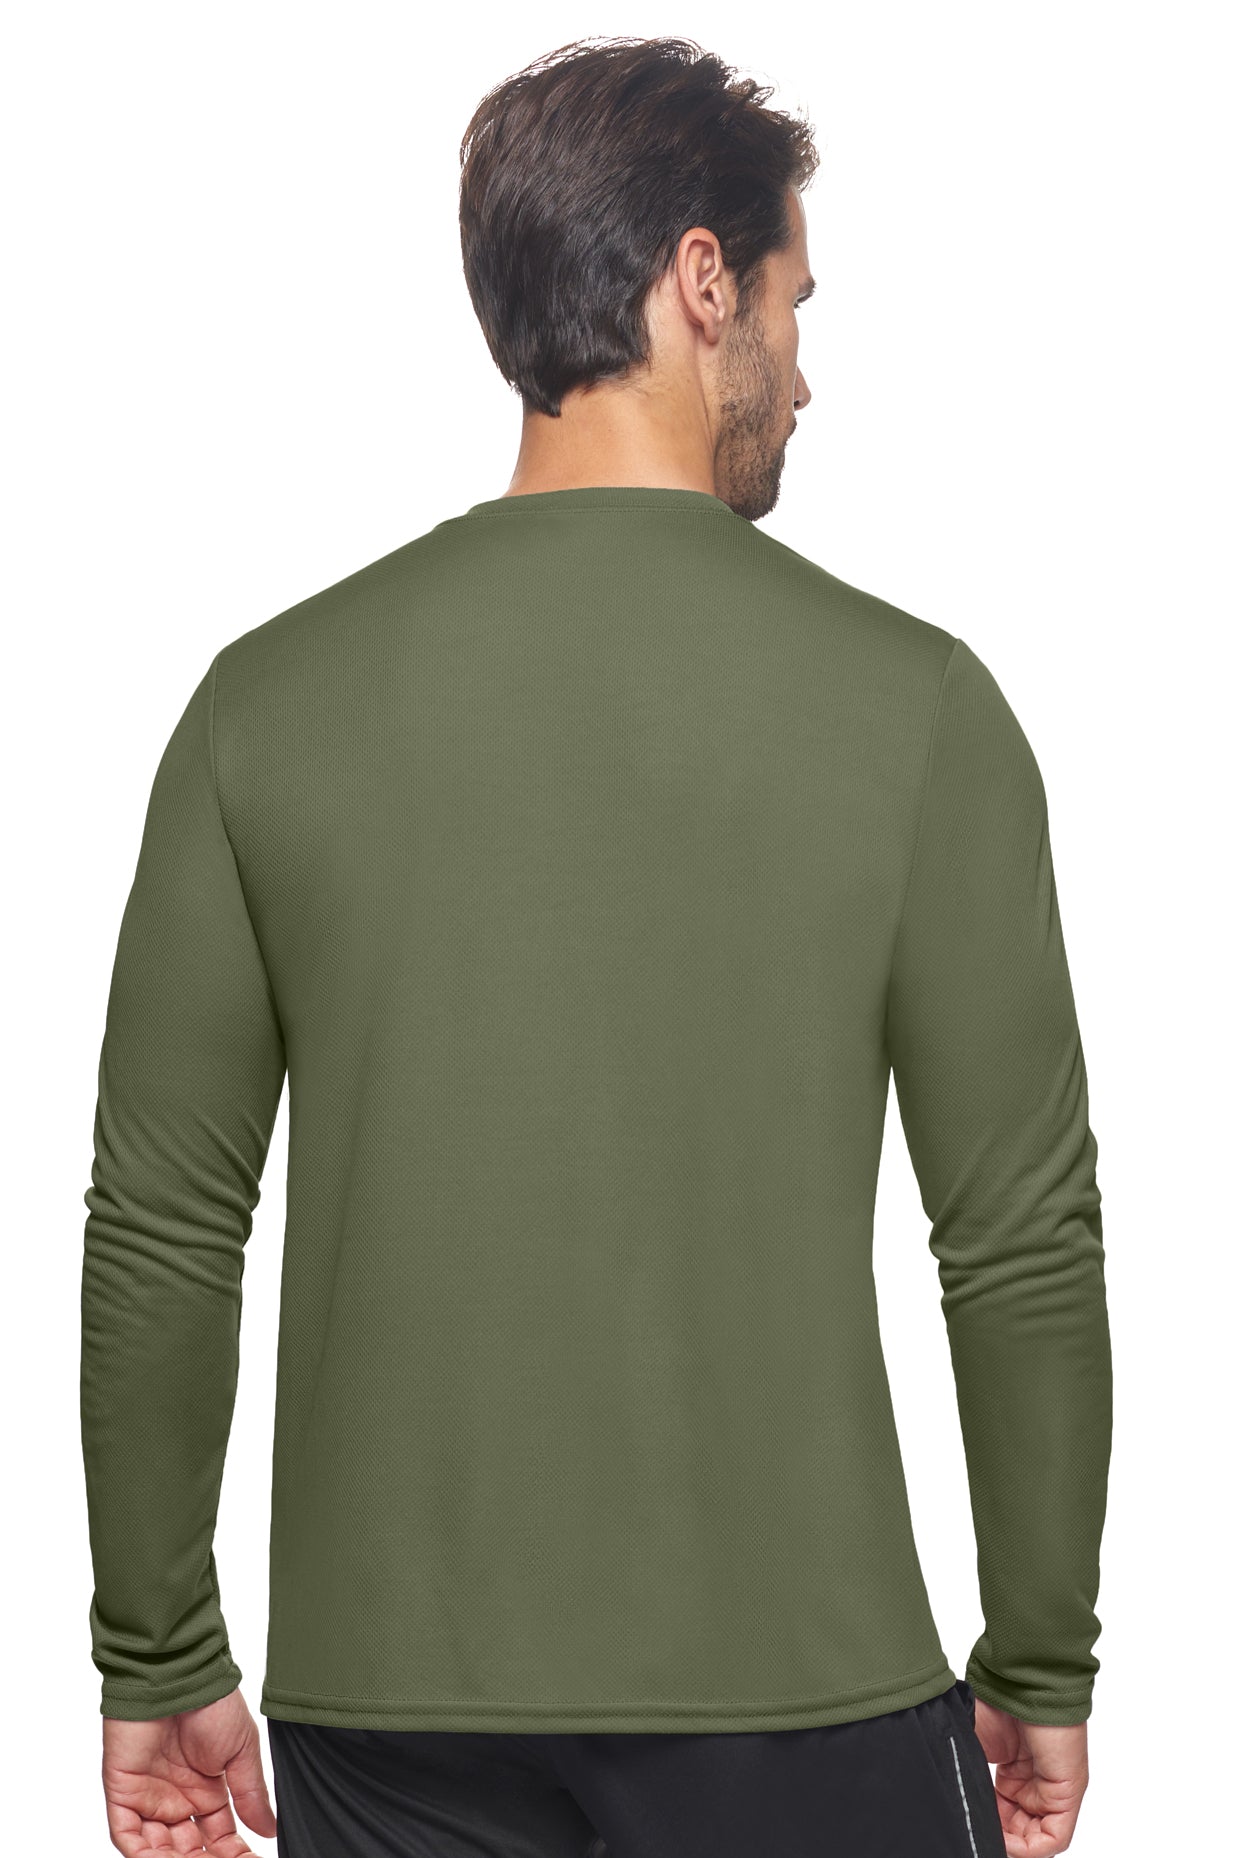 Expert Brand Wholesale Men's Oxymesh Performance Long Sleeve Tec Tee Made in USA AJ901D Military Green Image 3#military-green